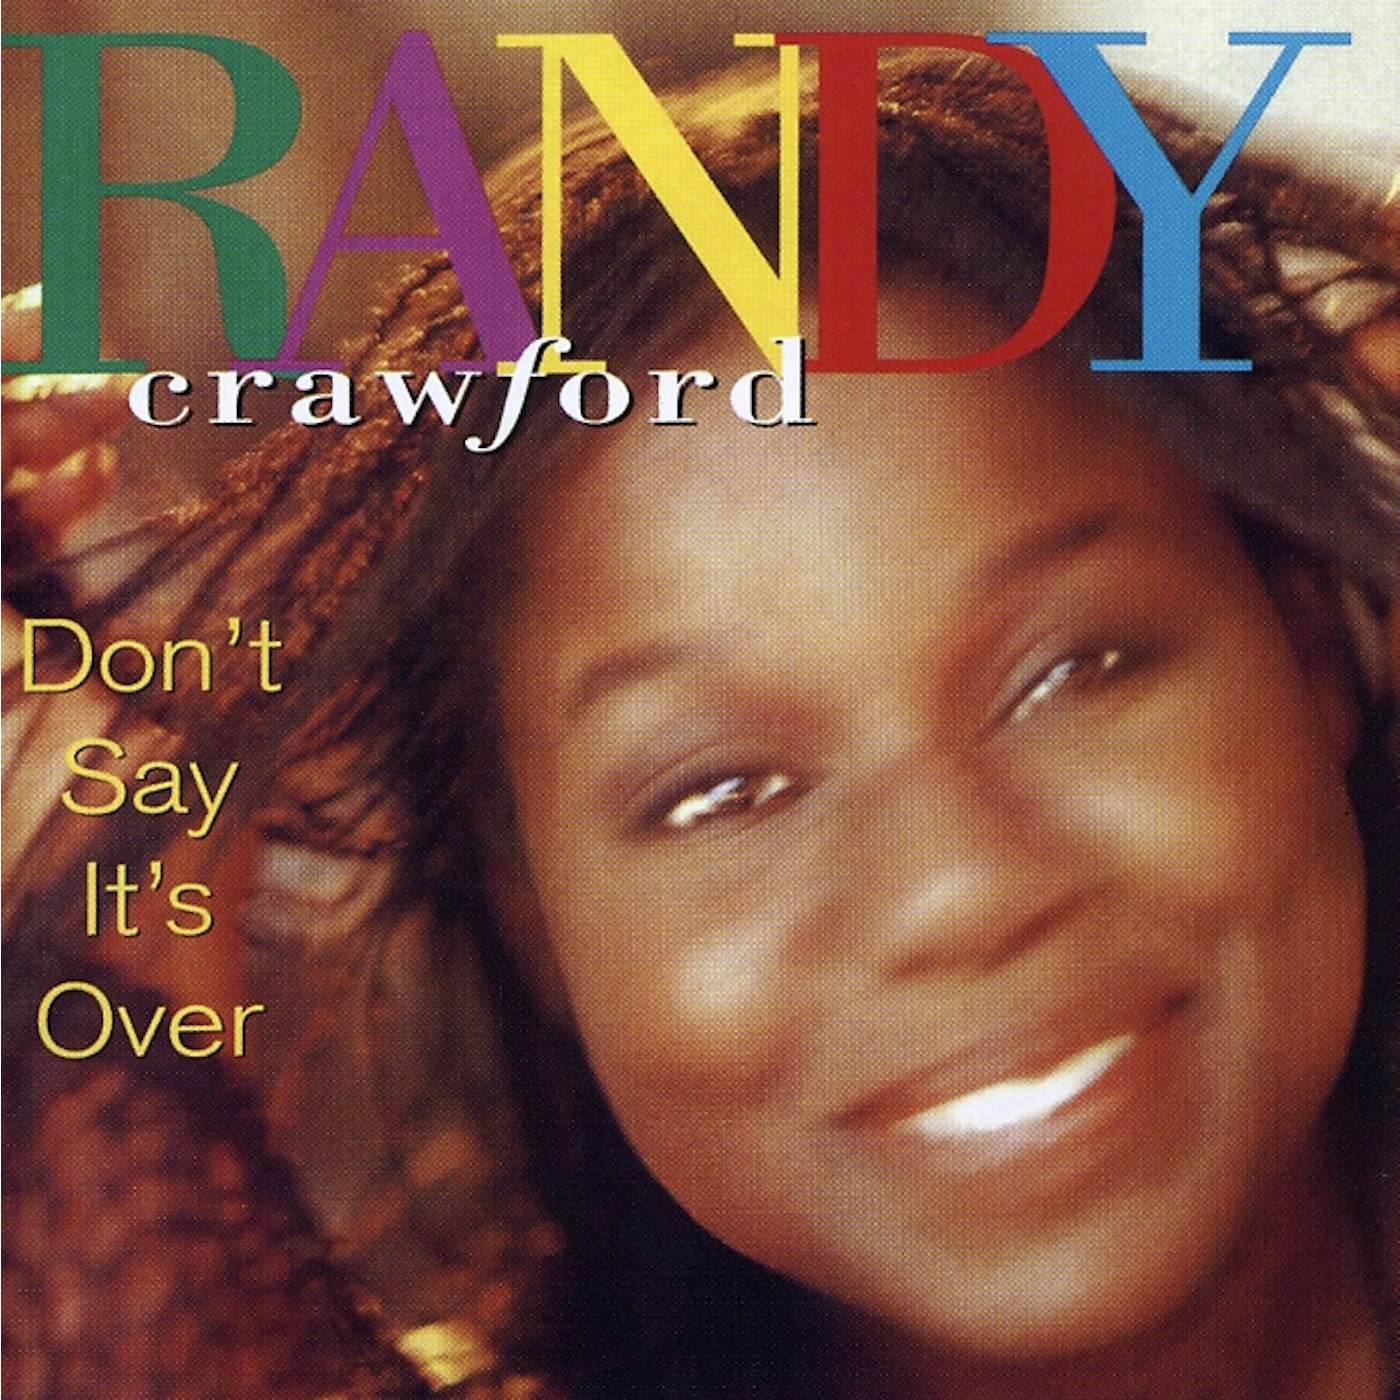 Randy Crawford DON'T SAY IT'S OVER CD